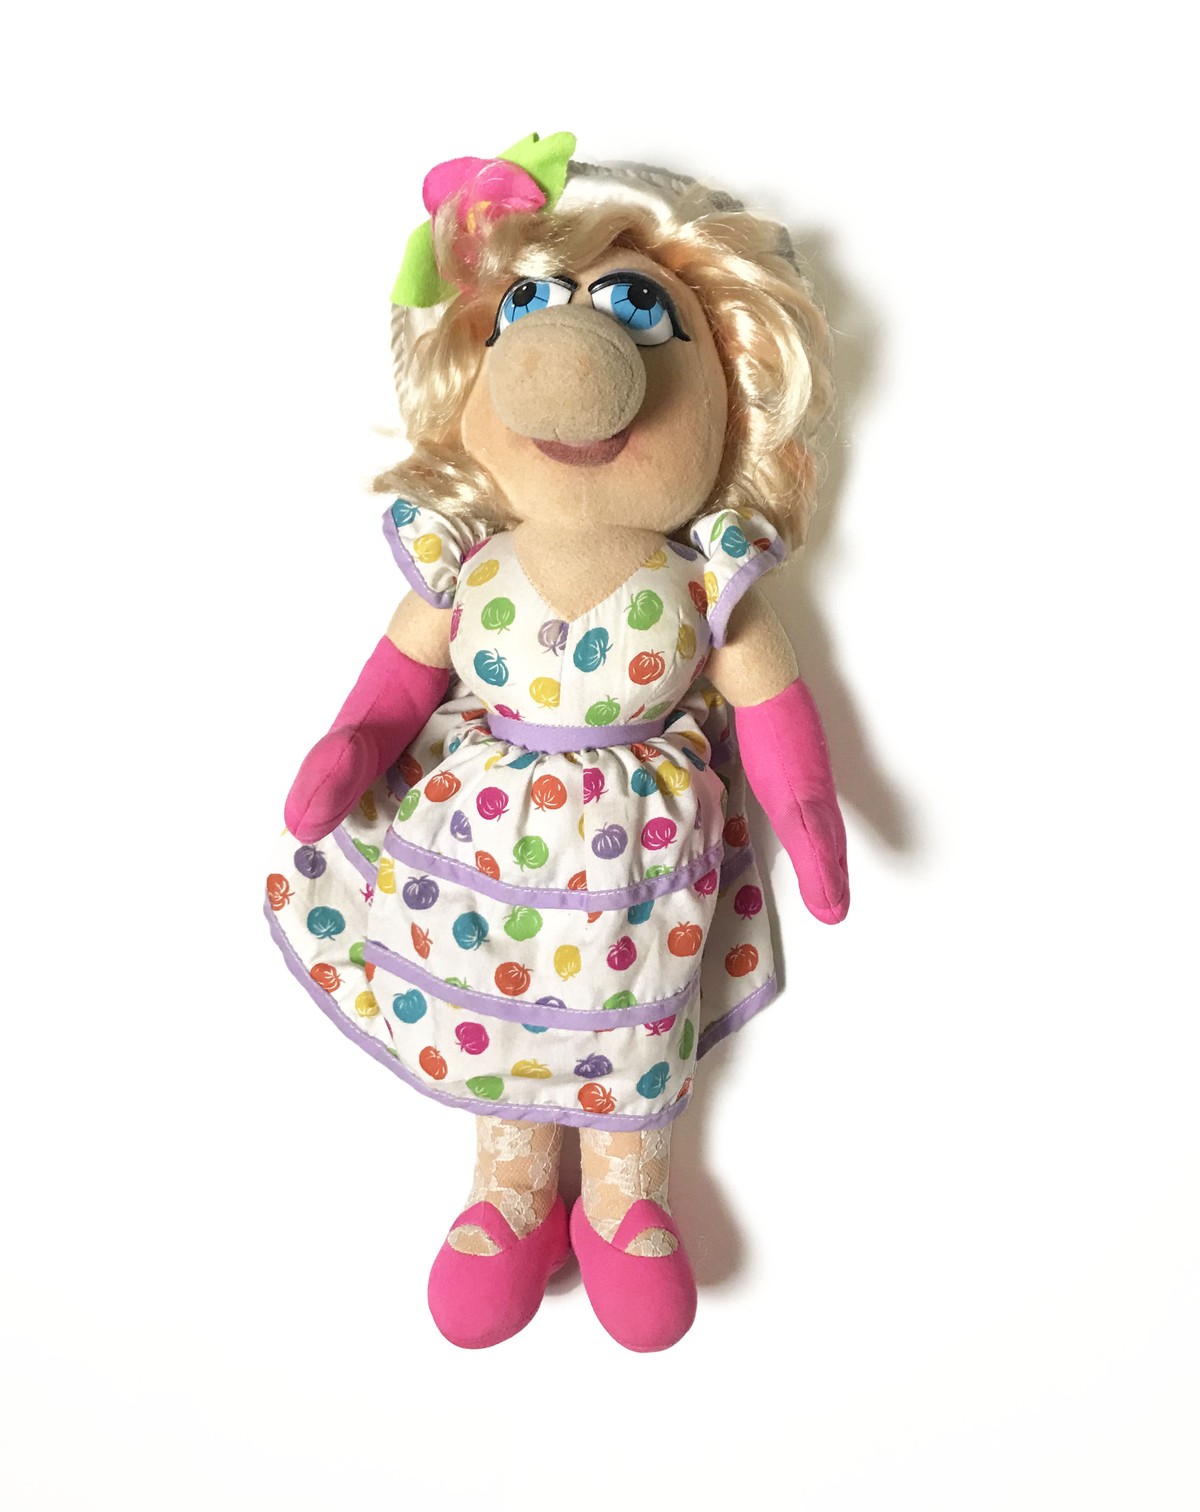 1993 The Muppets Miss Piggy Plush Doll Budstore